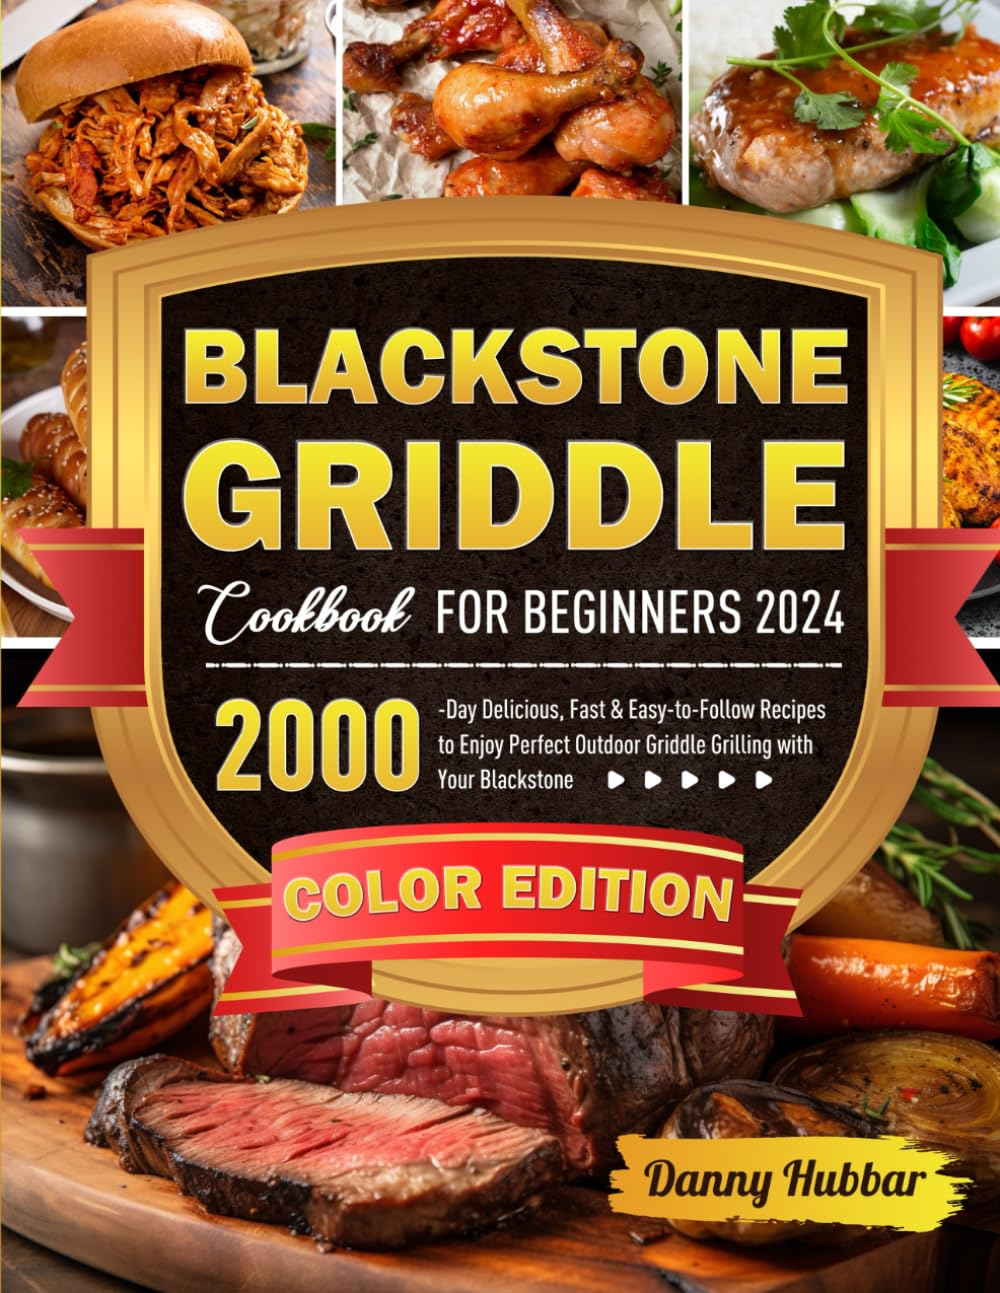 Blackstone Griddle Cookbook for Beginners 2024: 2000-Day Delicious, Fast & Easy-to-Follow Recipes to Enjoy Perfect Outdoor Griddle Grilling with Your Blackstone